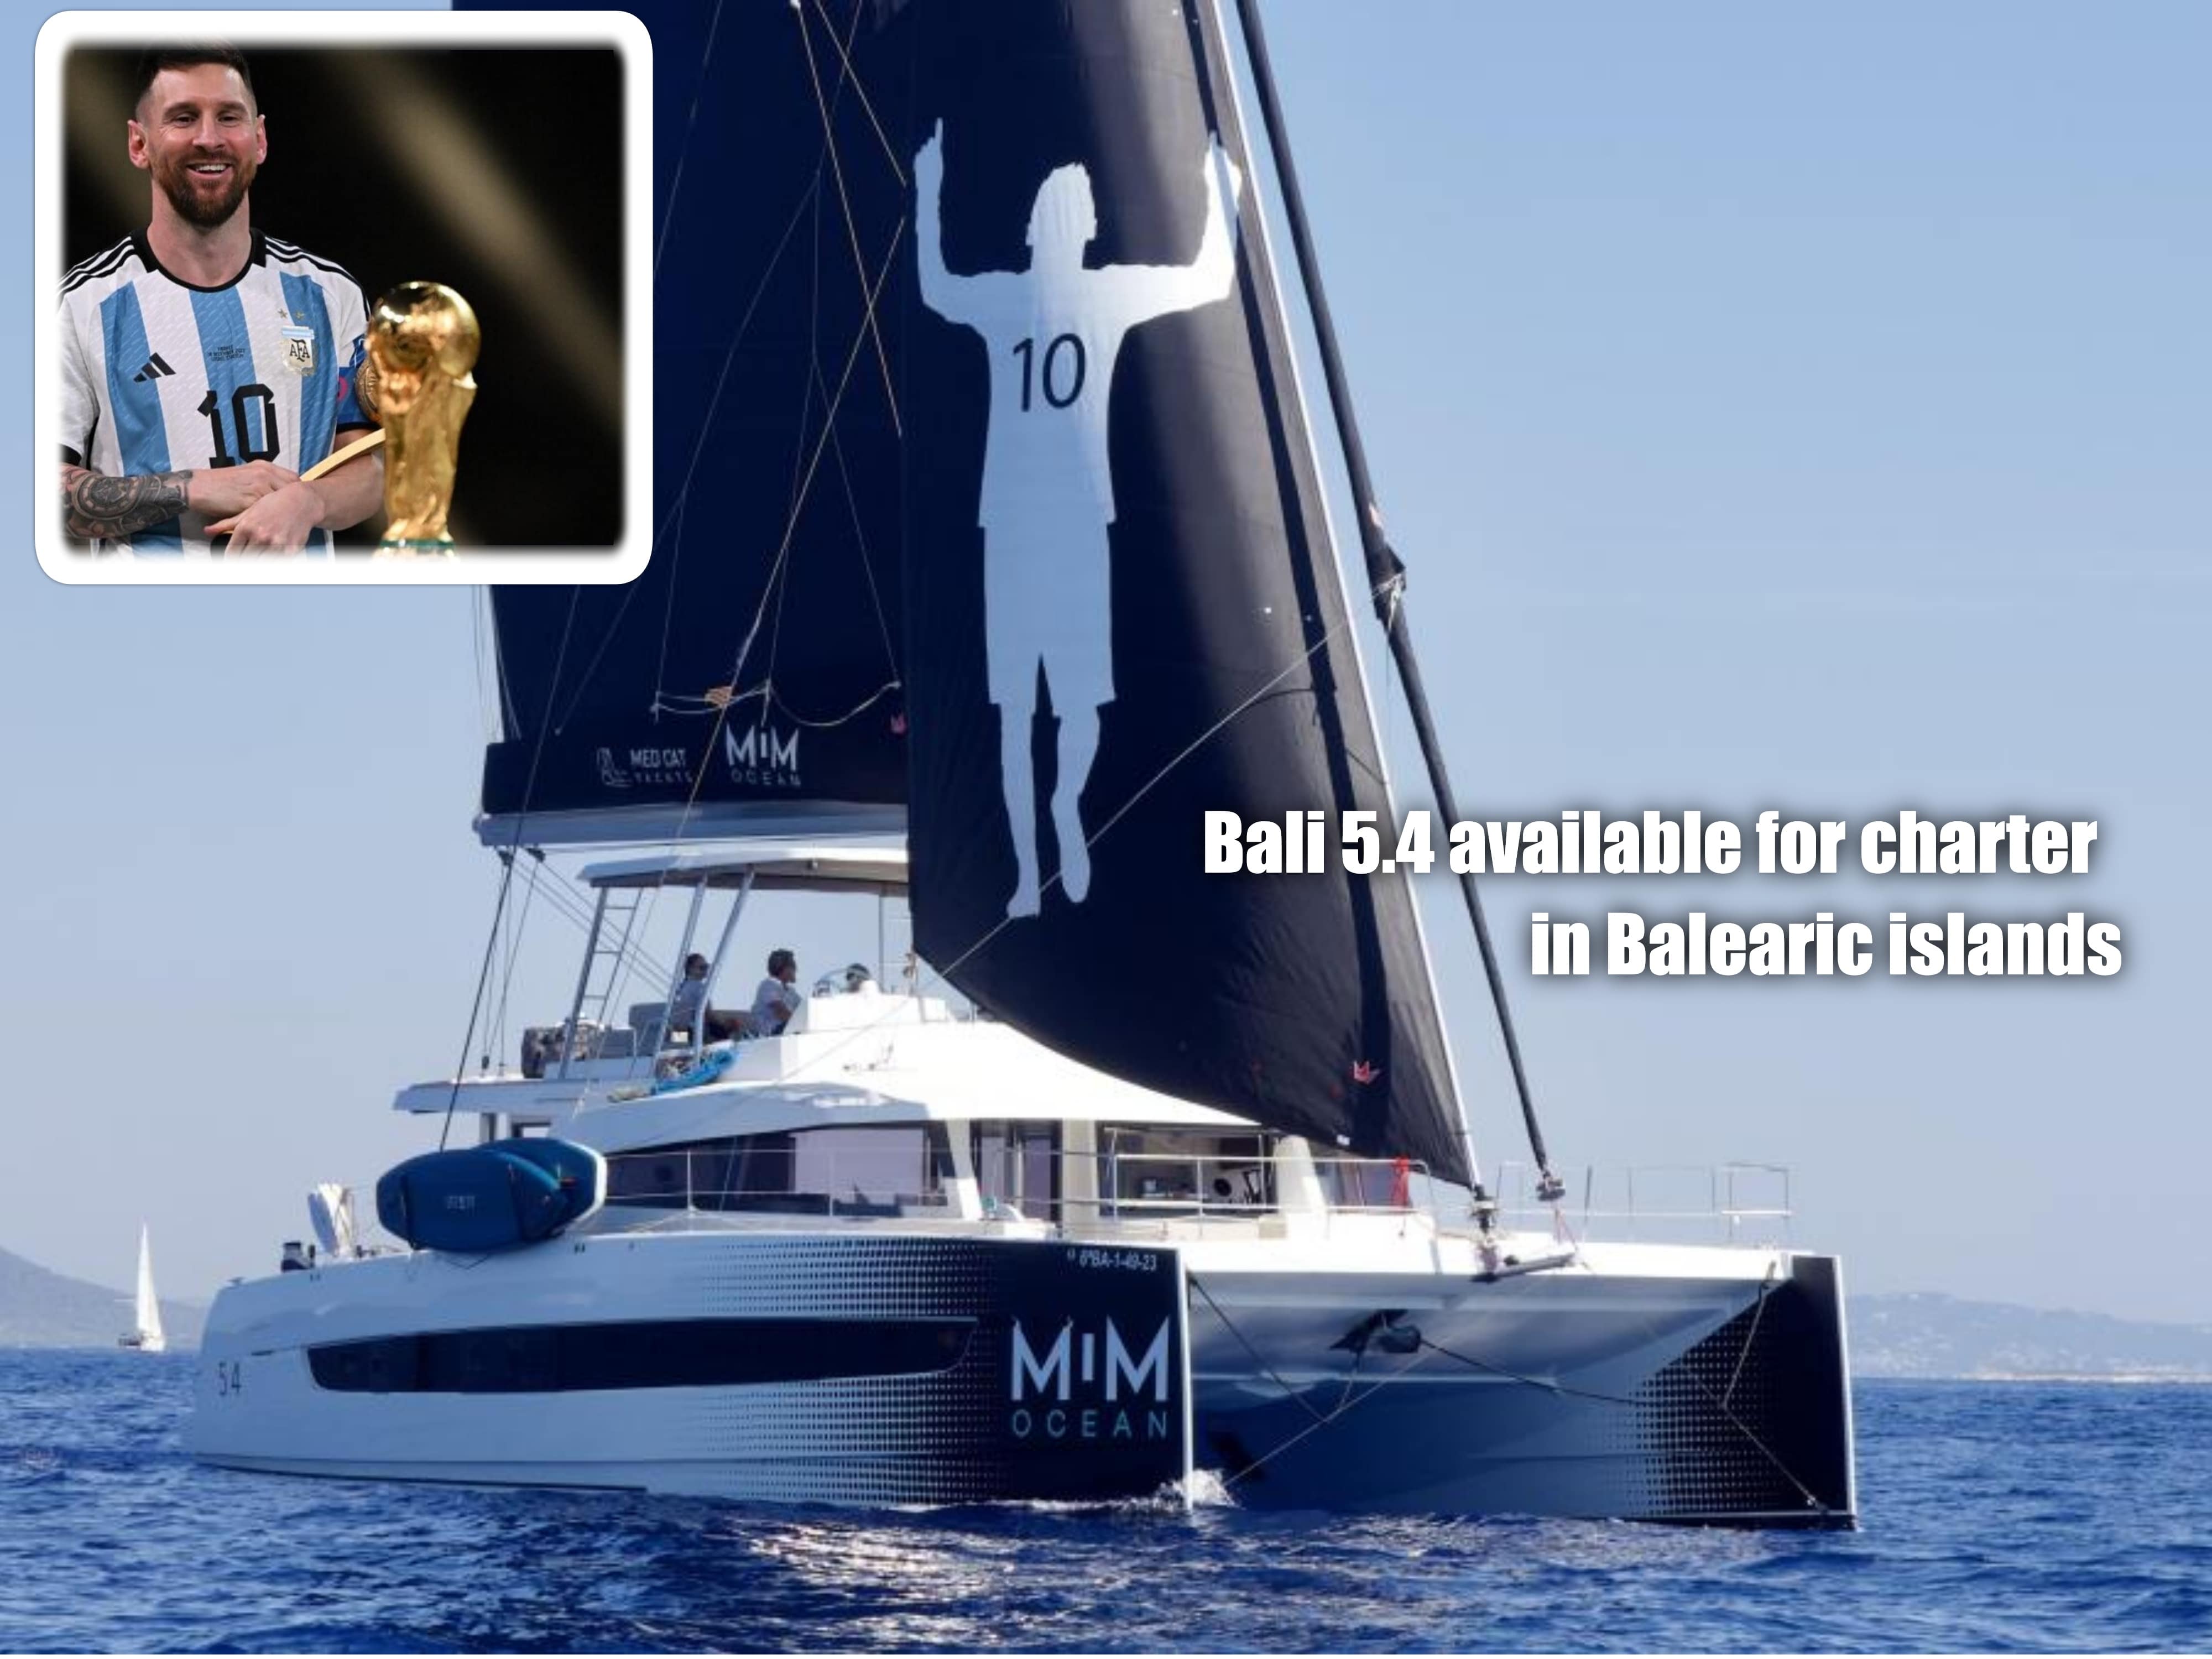 Messi launches new project with Catamarans Bali 5.4 in the Balearic Islands